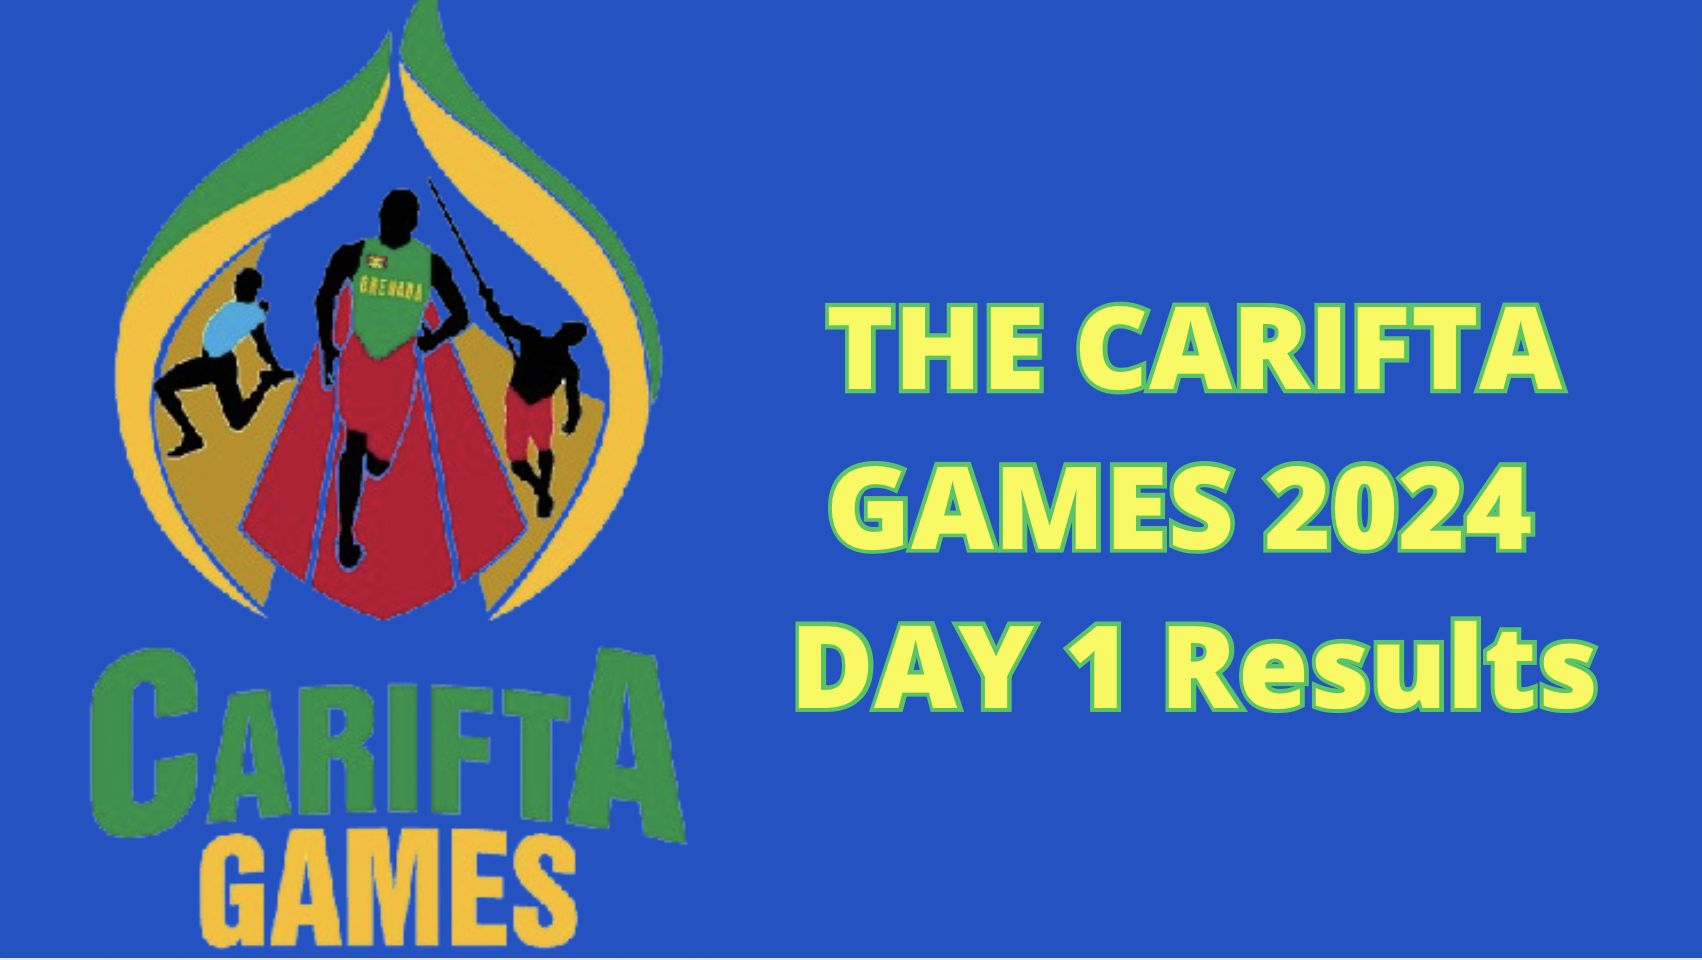 Finals-Only: Carifta Games 2024 Results Morning Session: Day 1